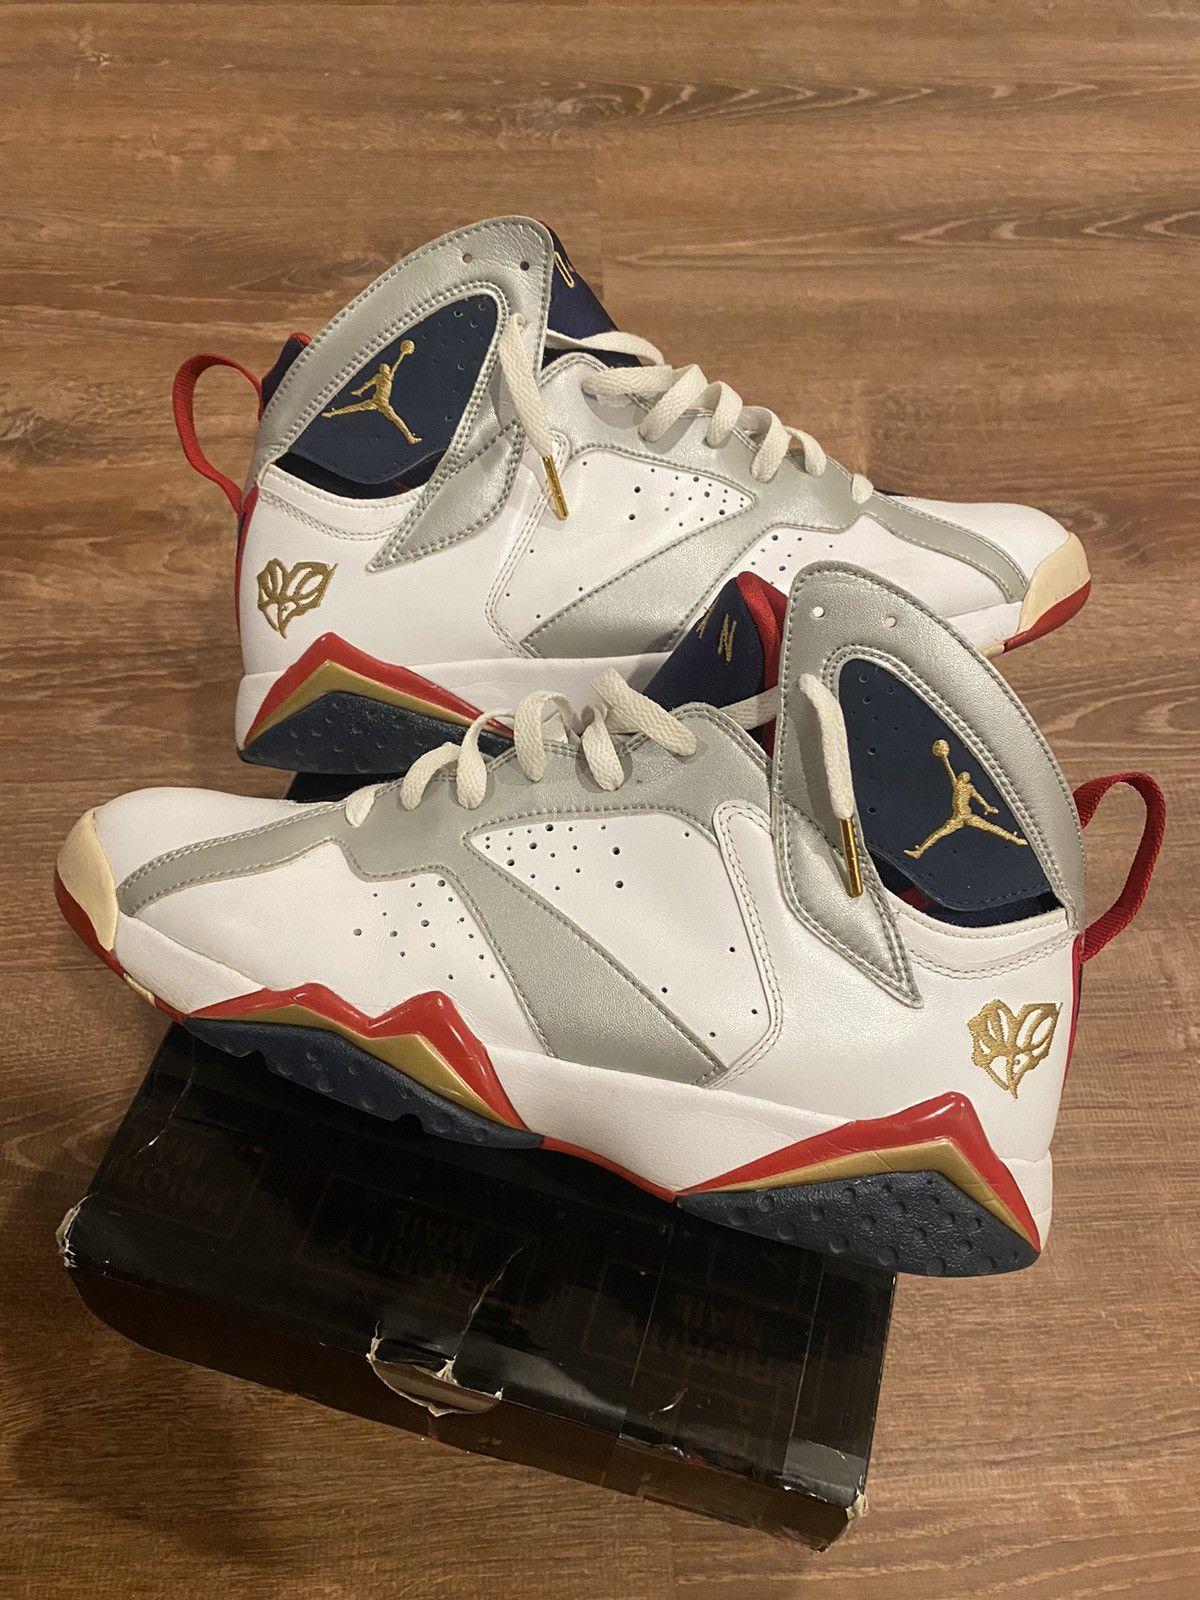 Nike Jordan 7 “For the Love of the Game” 2010 Size US 12 / EU 45 - 1 Preview